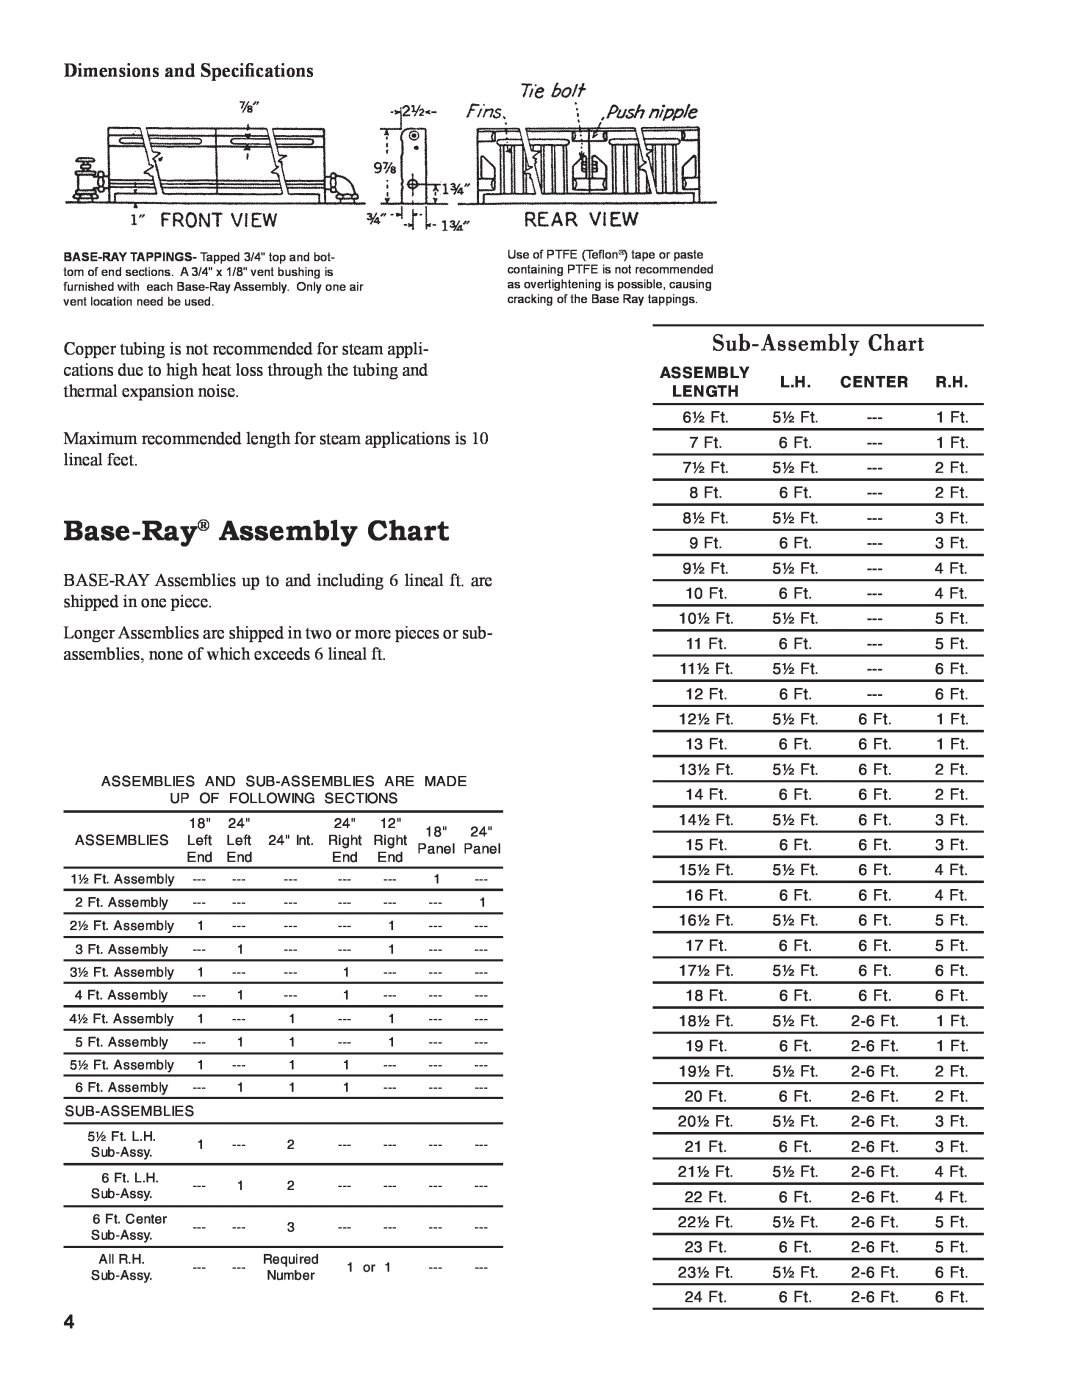 Burnham 81441001R8-3/06 installation instructions Base-Ray Assembly Chart, Sub-AssemblyChart, Dimensions and Speciﬁcations 